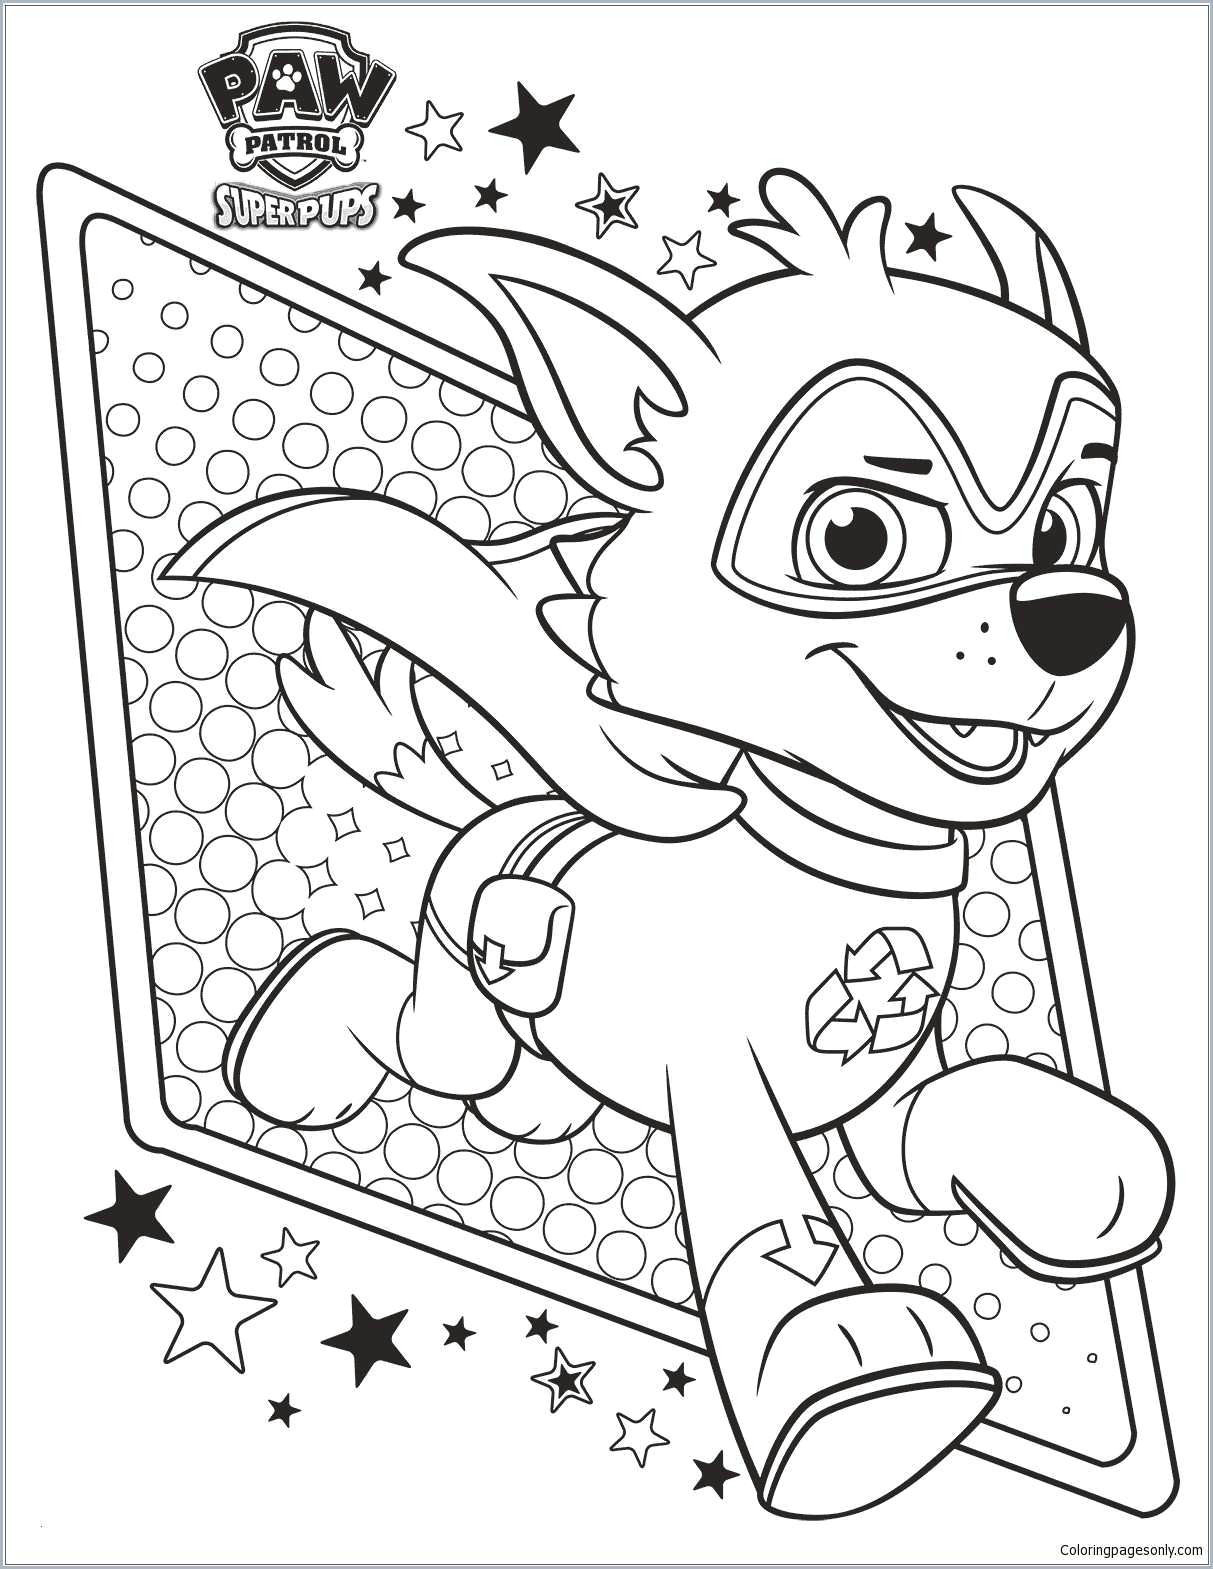 Drawing Ghost Eyes Easy Coloring Pages Halloween Awesome Coloring Pages Simple Ghost